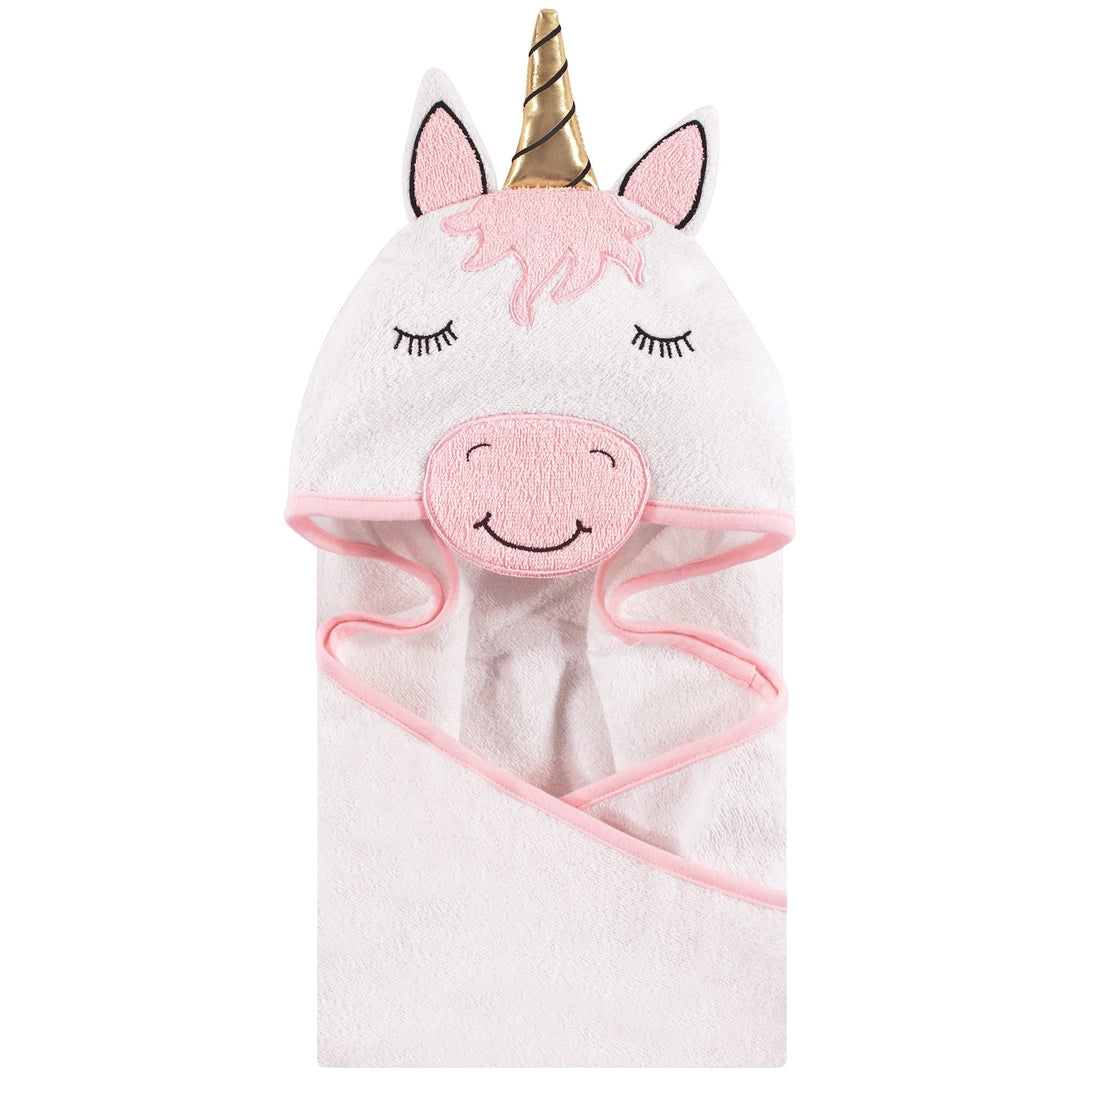 Personalized Baby Cotton Animal Face Hooded Towel, Modern